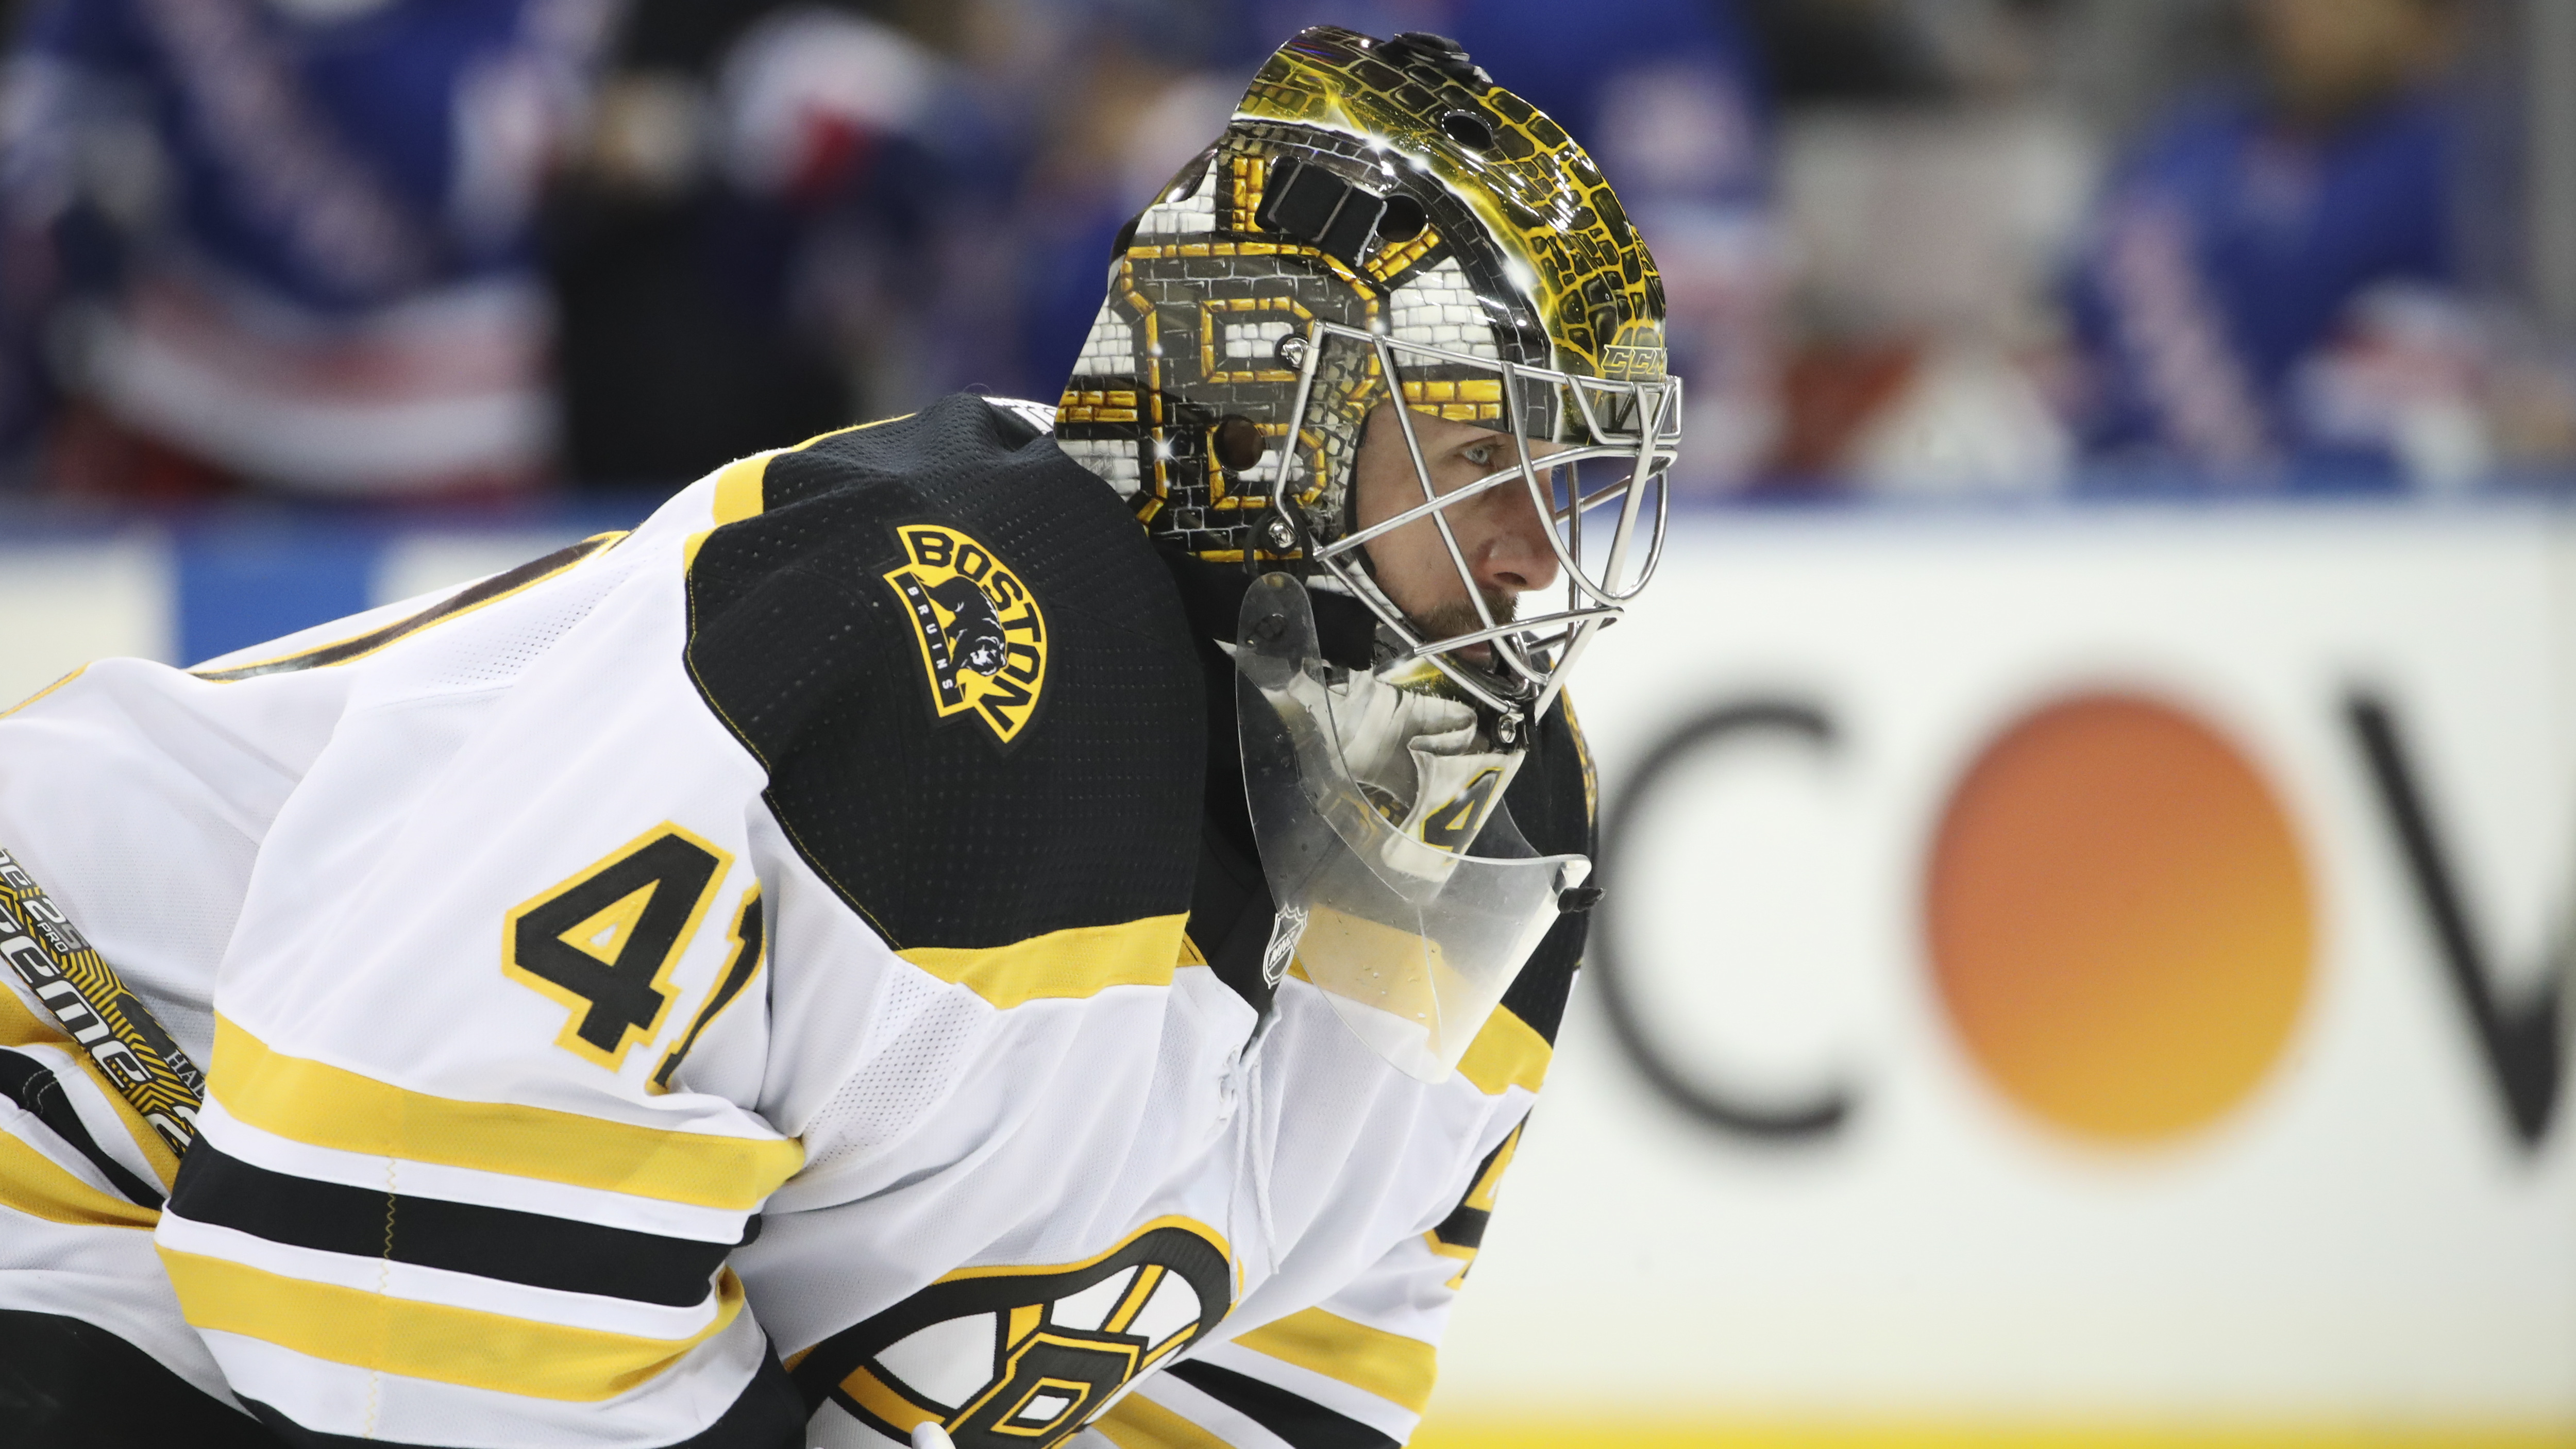 The Bruins are playing well, but it's Jaroslav Halak who will